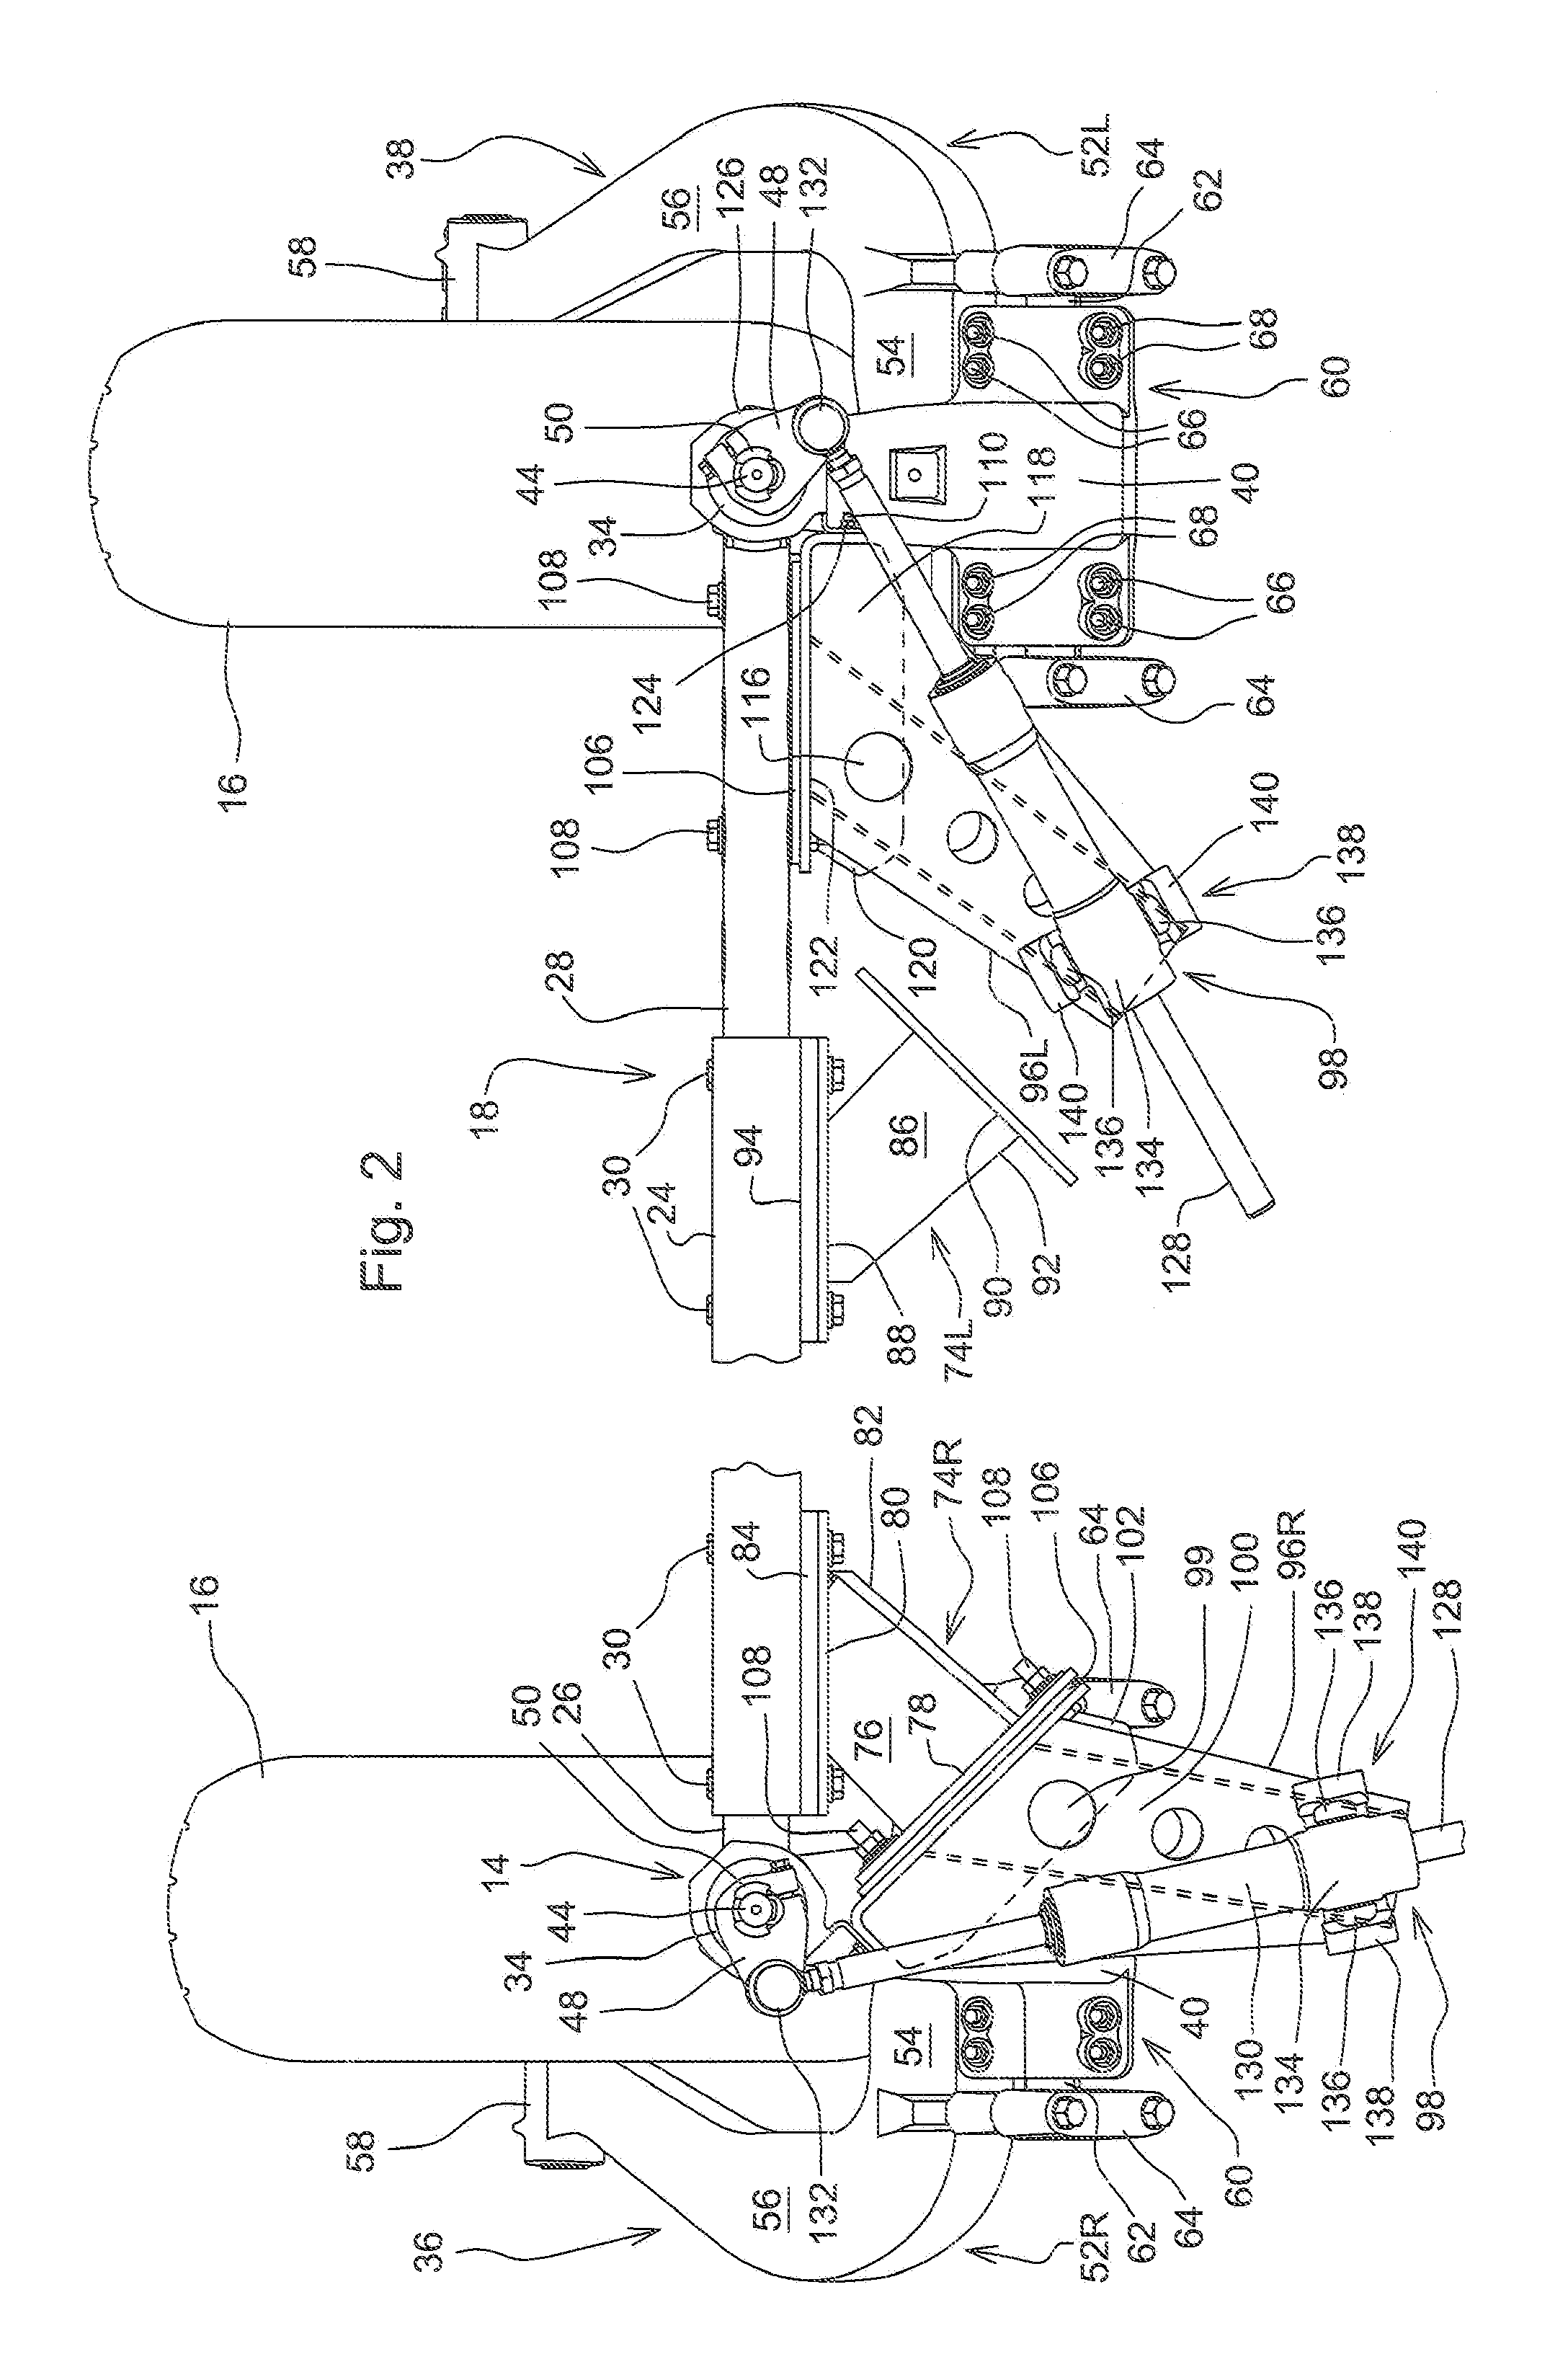 Steering Cylinder Mounting Arrangement Used With A Length-Adjustable Axle